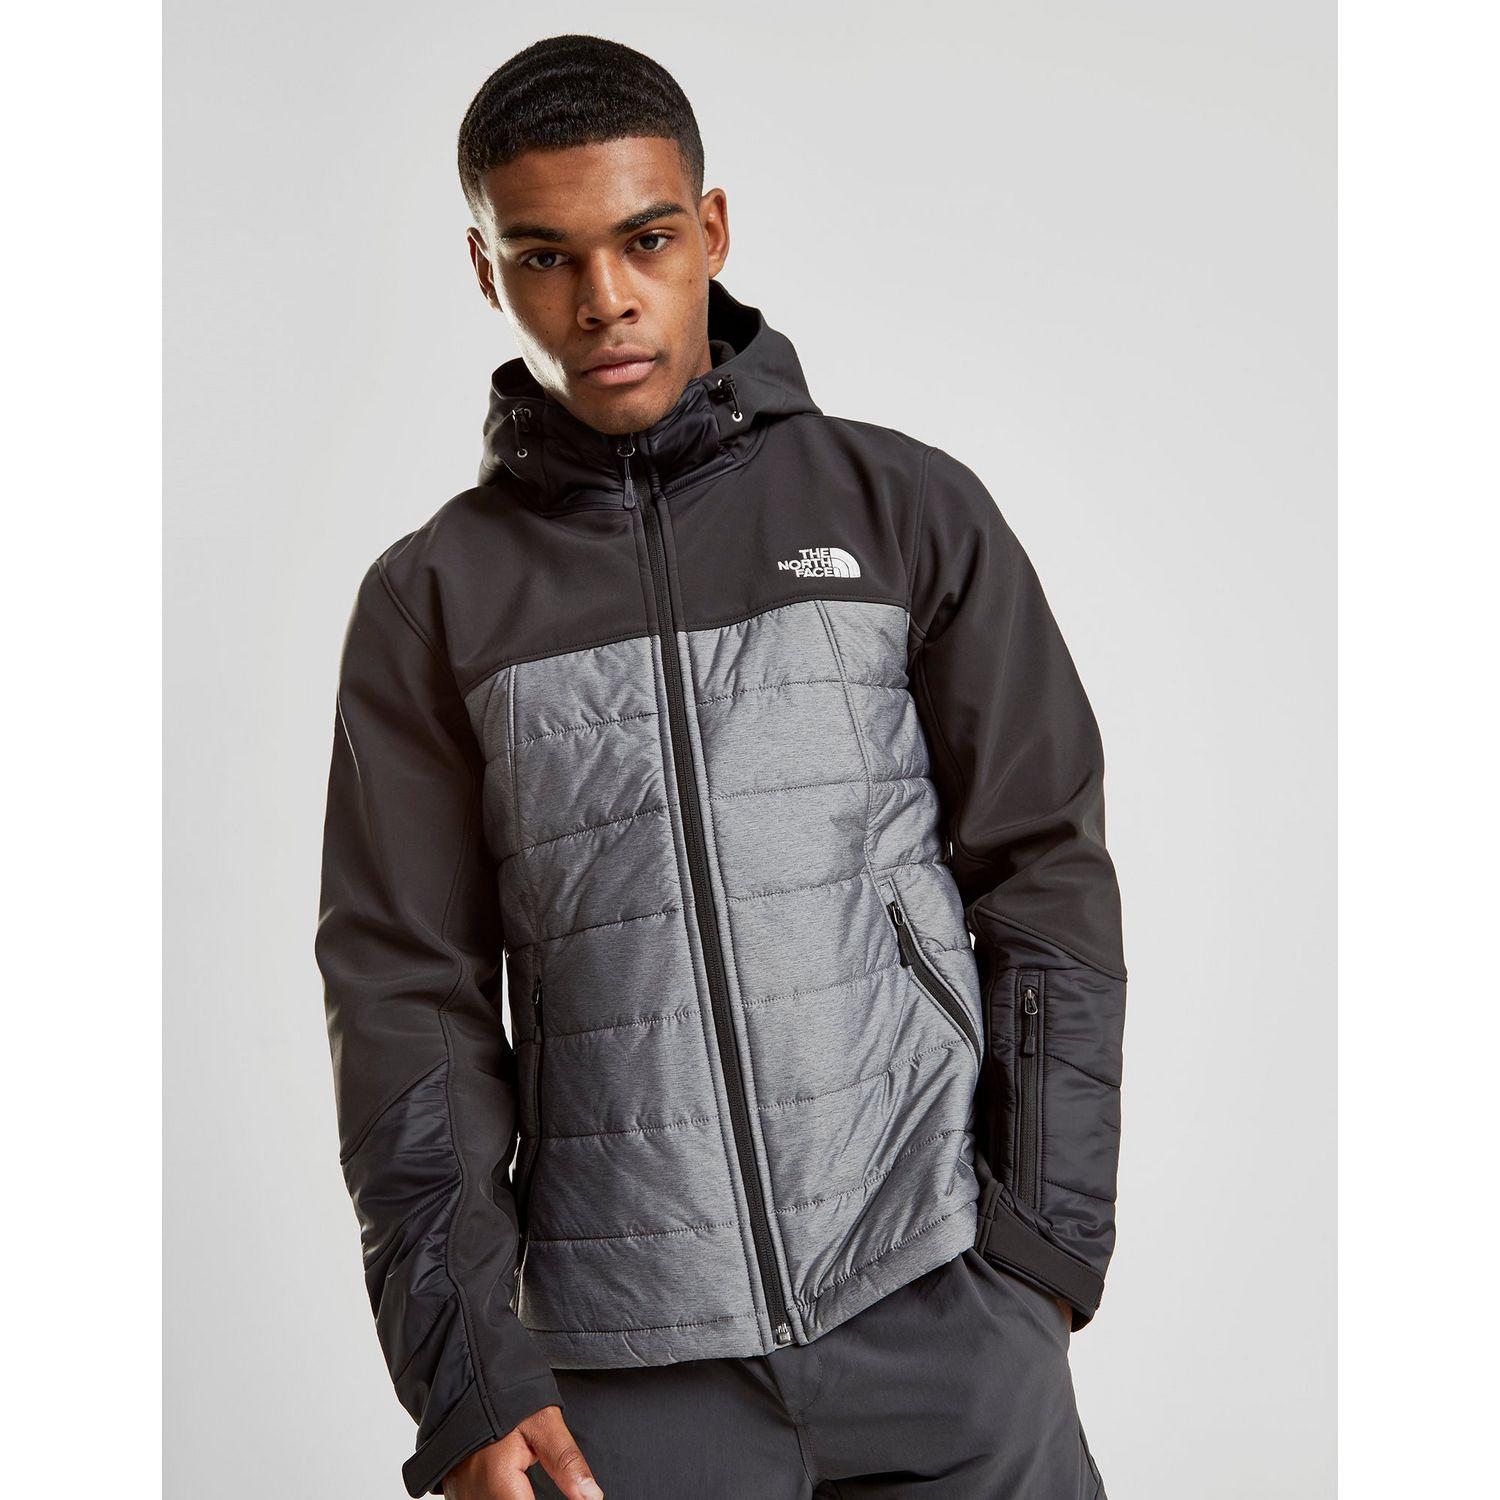 the north face tech hybrid softshell jacket